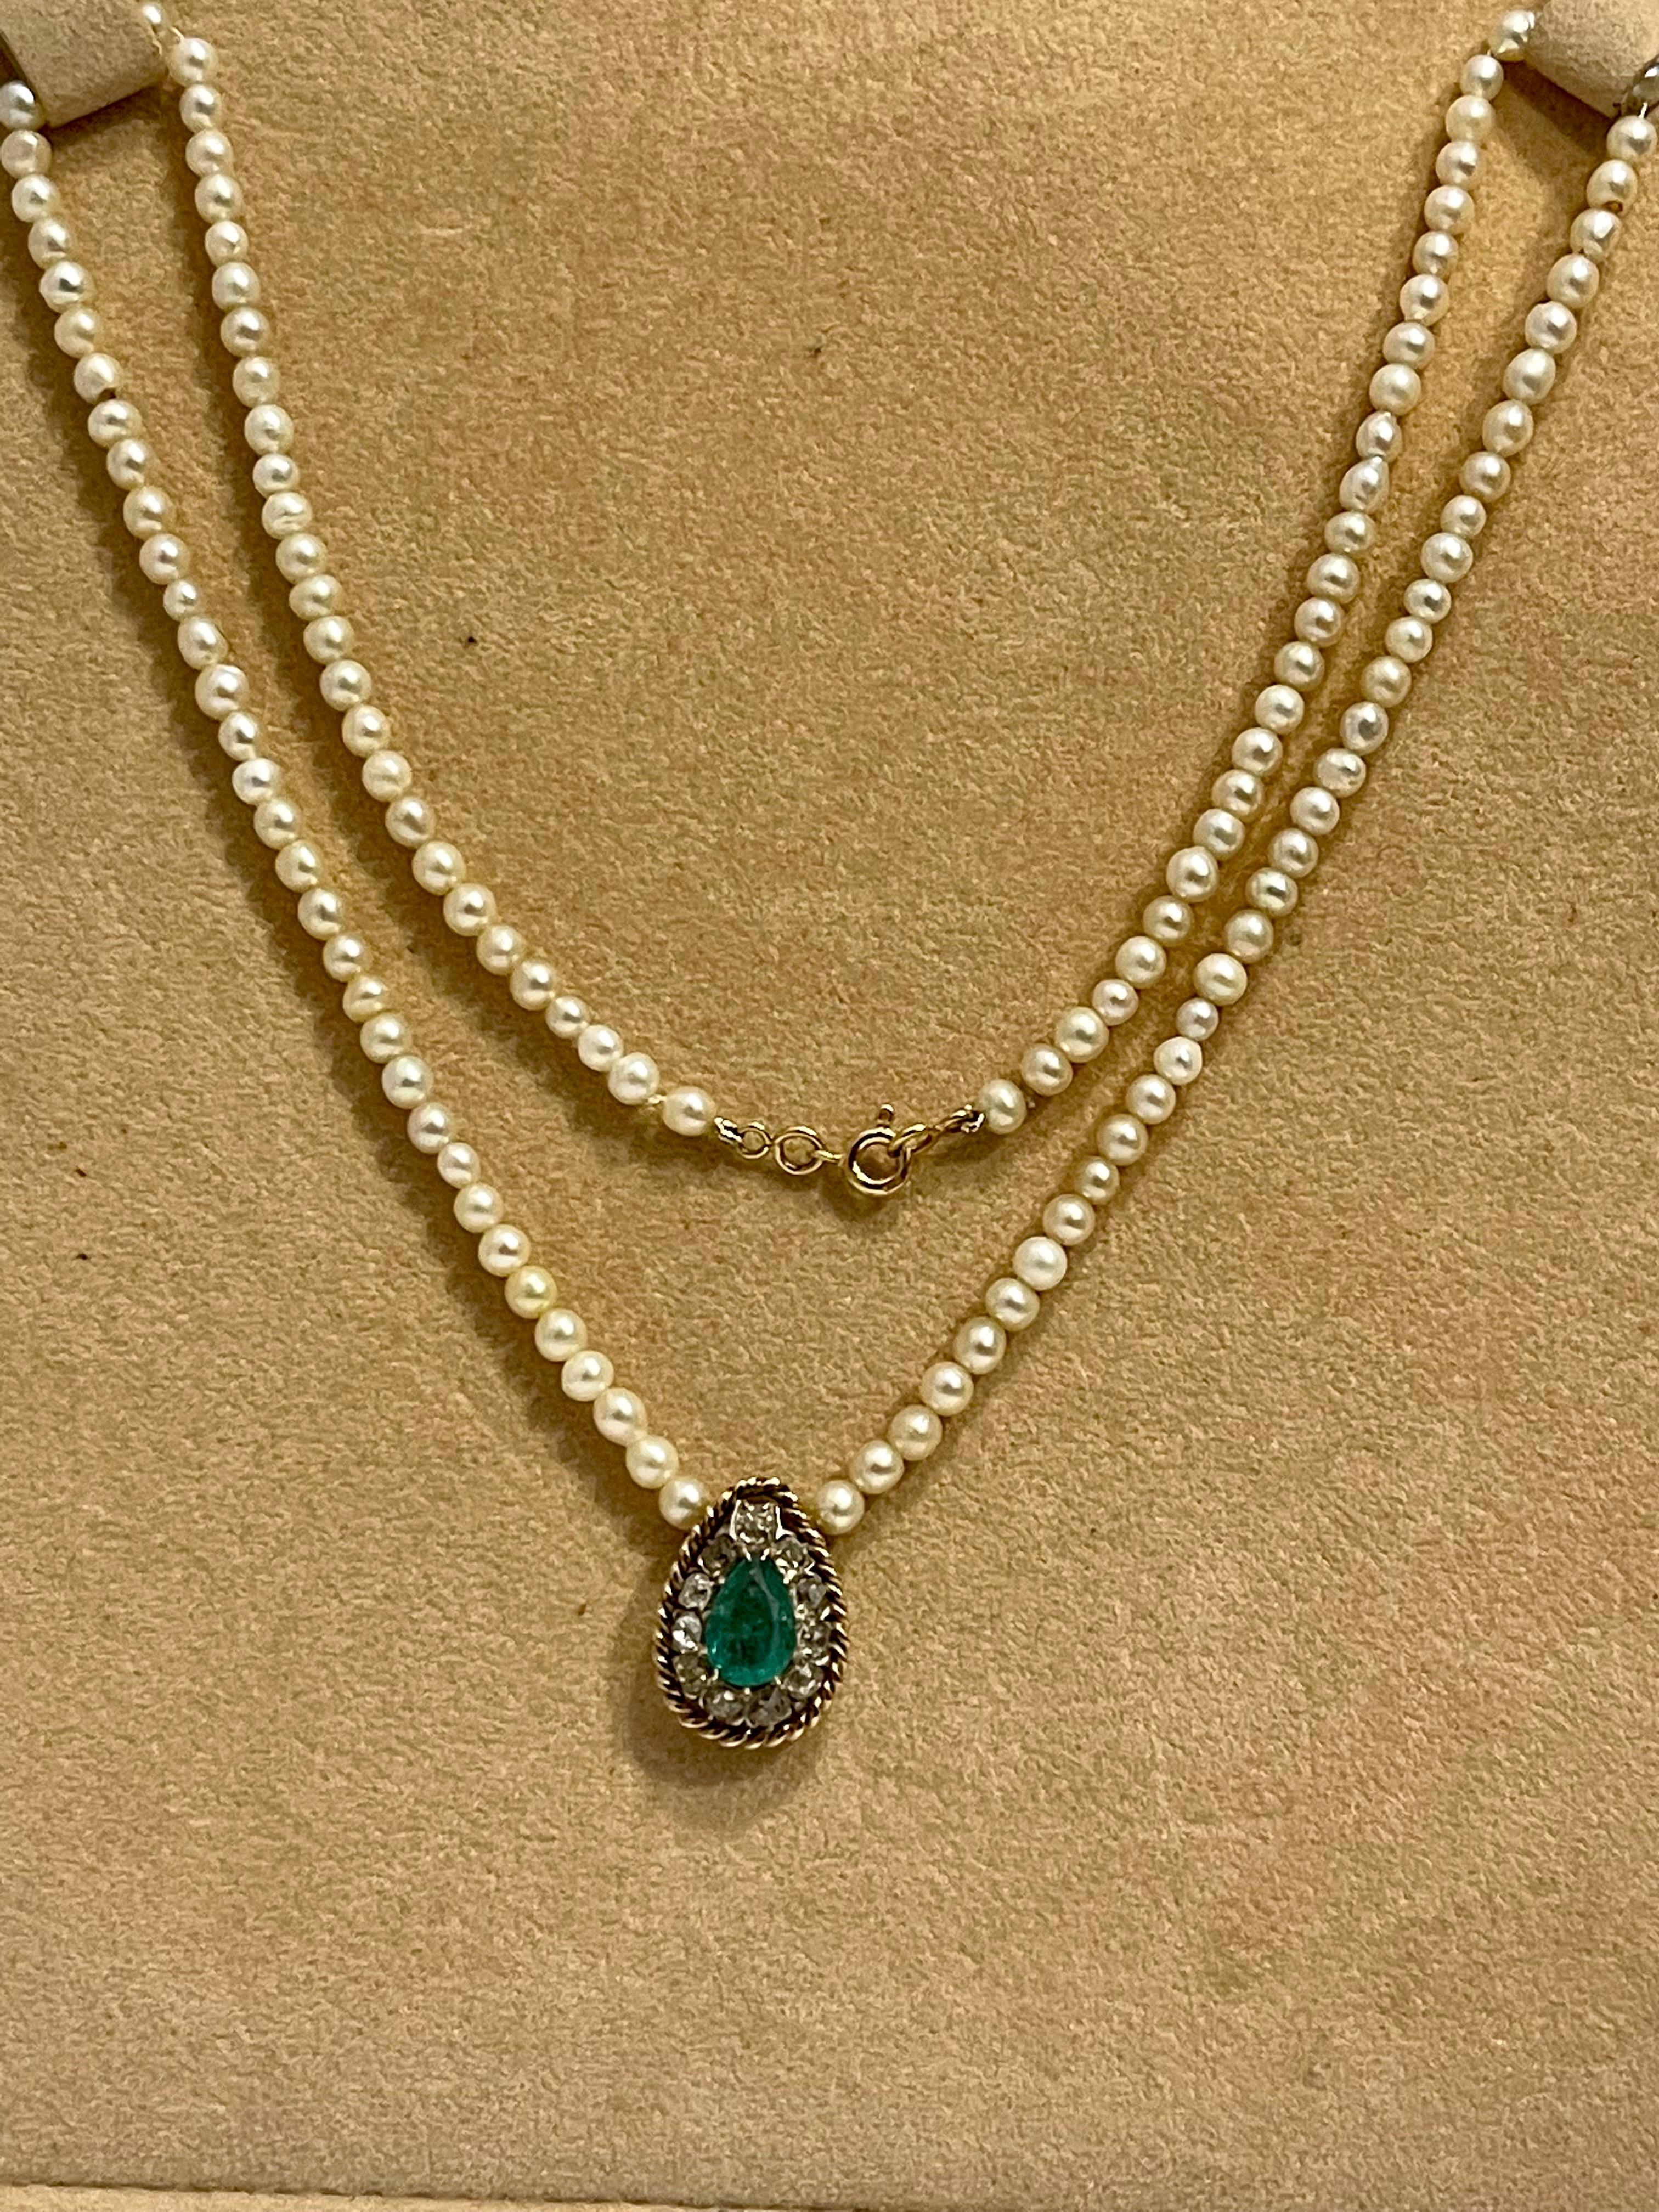 Women's 120 Years Old GIA Certified Natural Basra Pearls & Emerald Necklace 14KY Gold For Sale